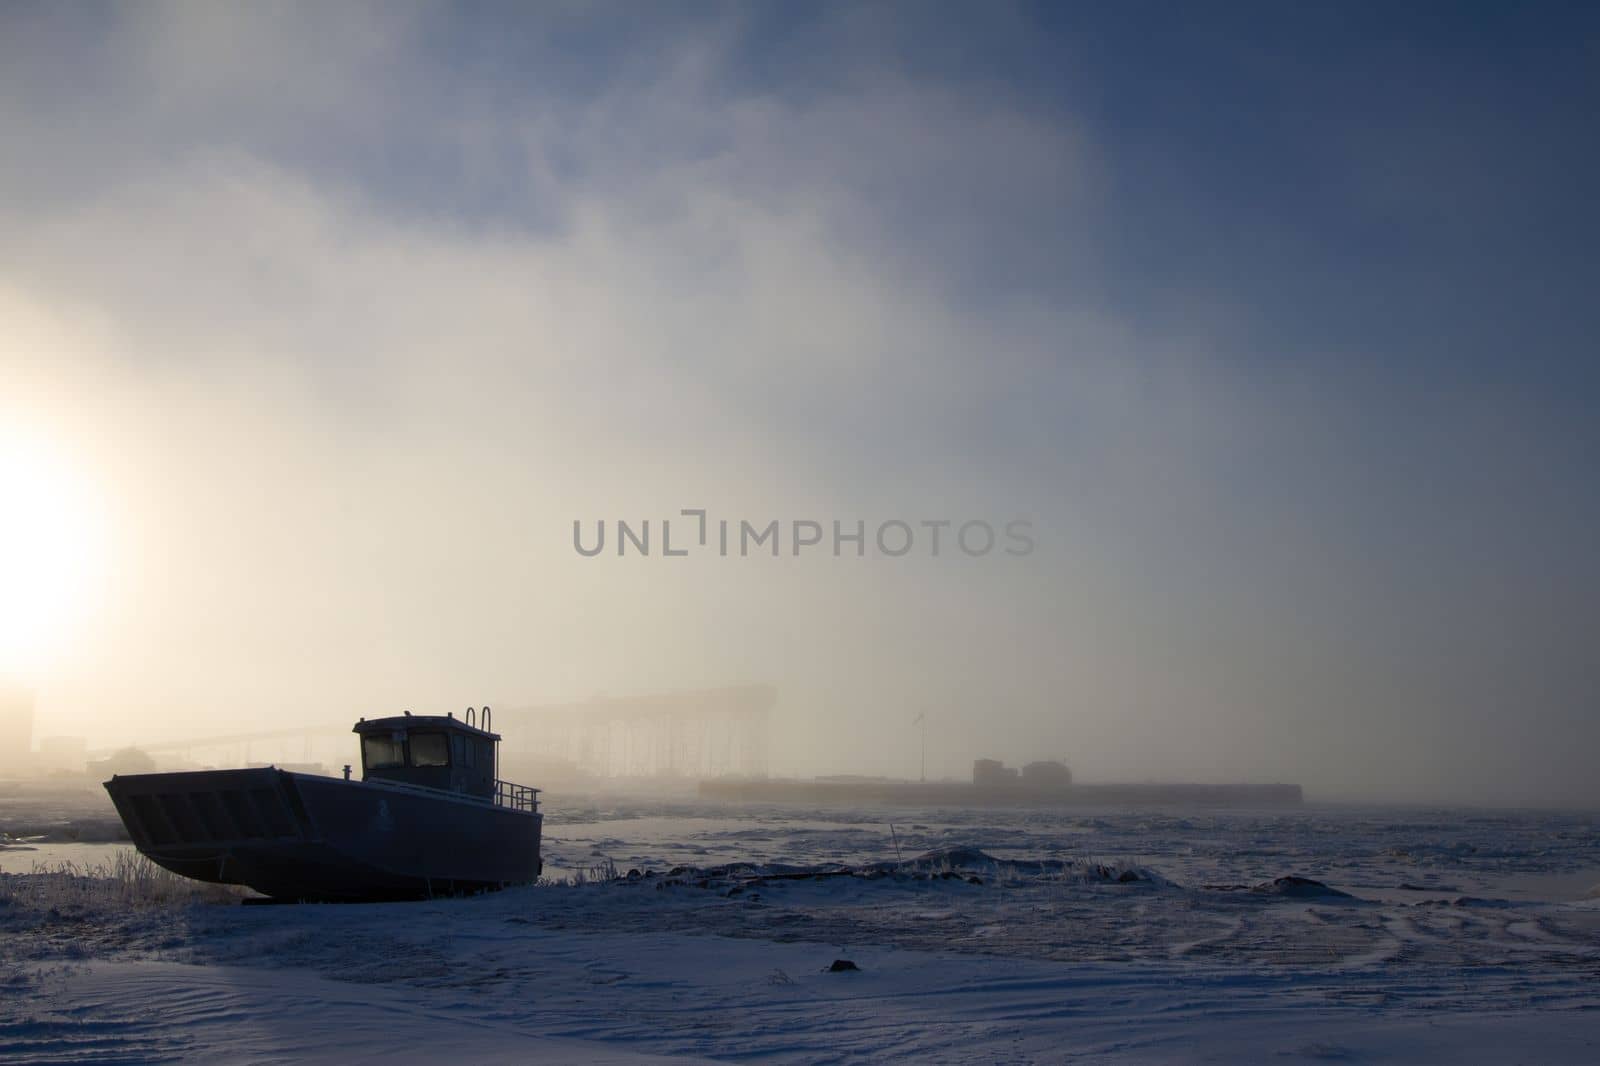 Landing craft centre console aluminum power boat sitting on snow covered beach by Granchinho